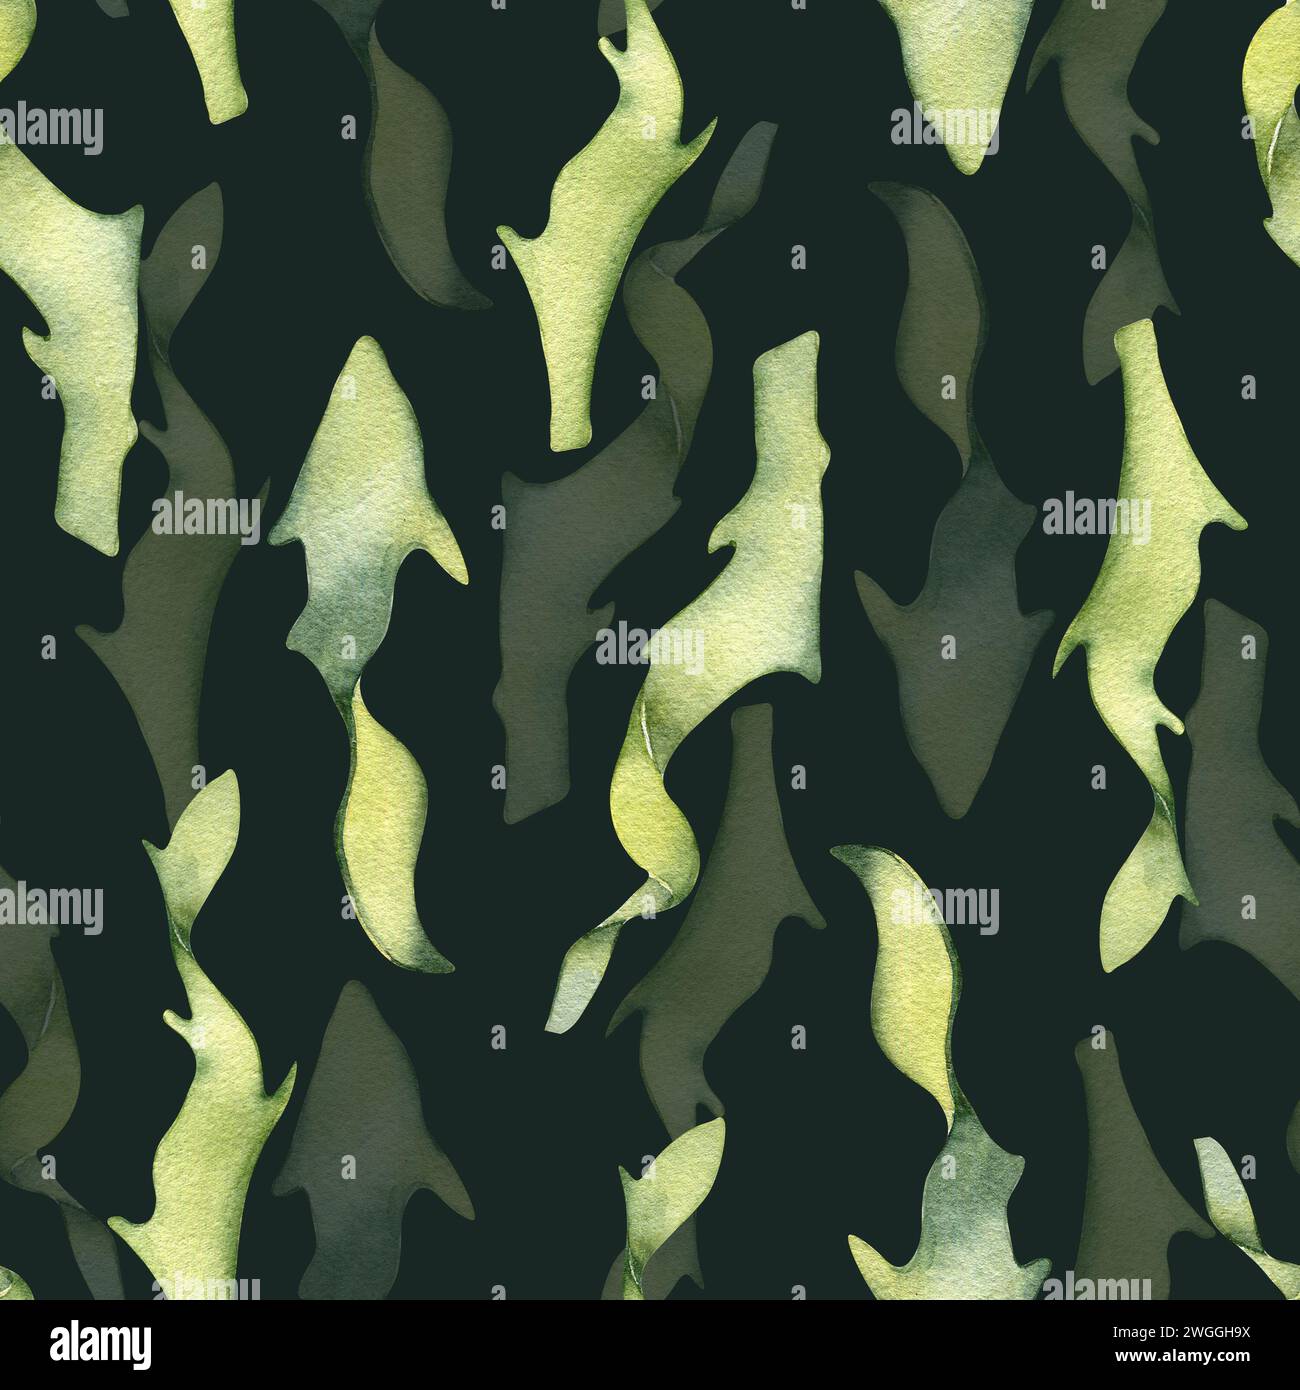 Watercolor seamless pattern of colorful laminaria illustration isolated on dark. Kelp, seaweeds hand drawn. Painted algae. Design for background, text Stock Photo